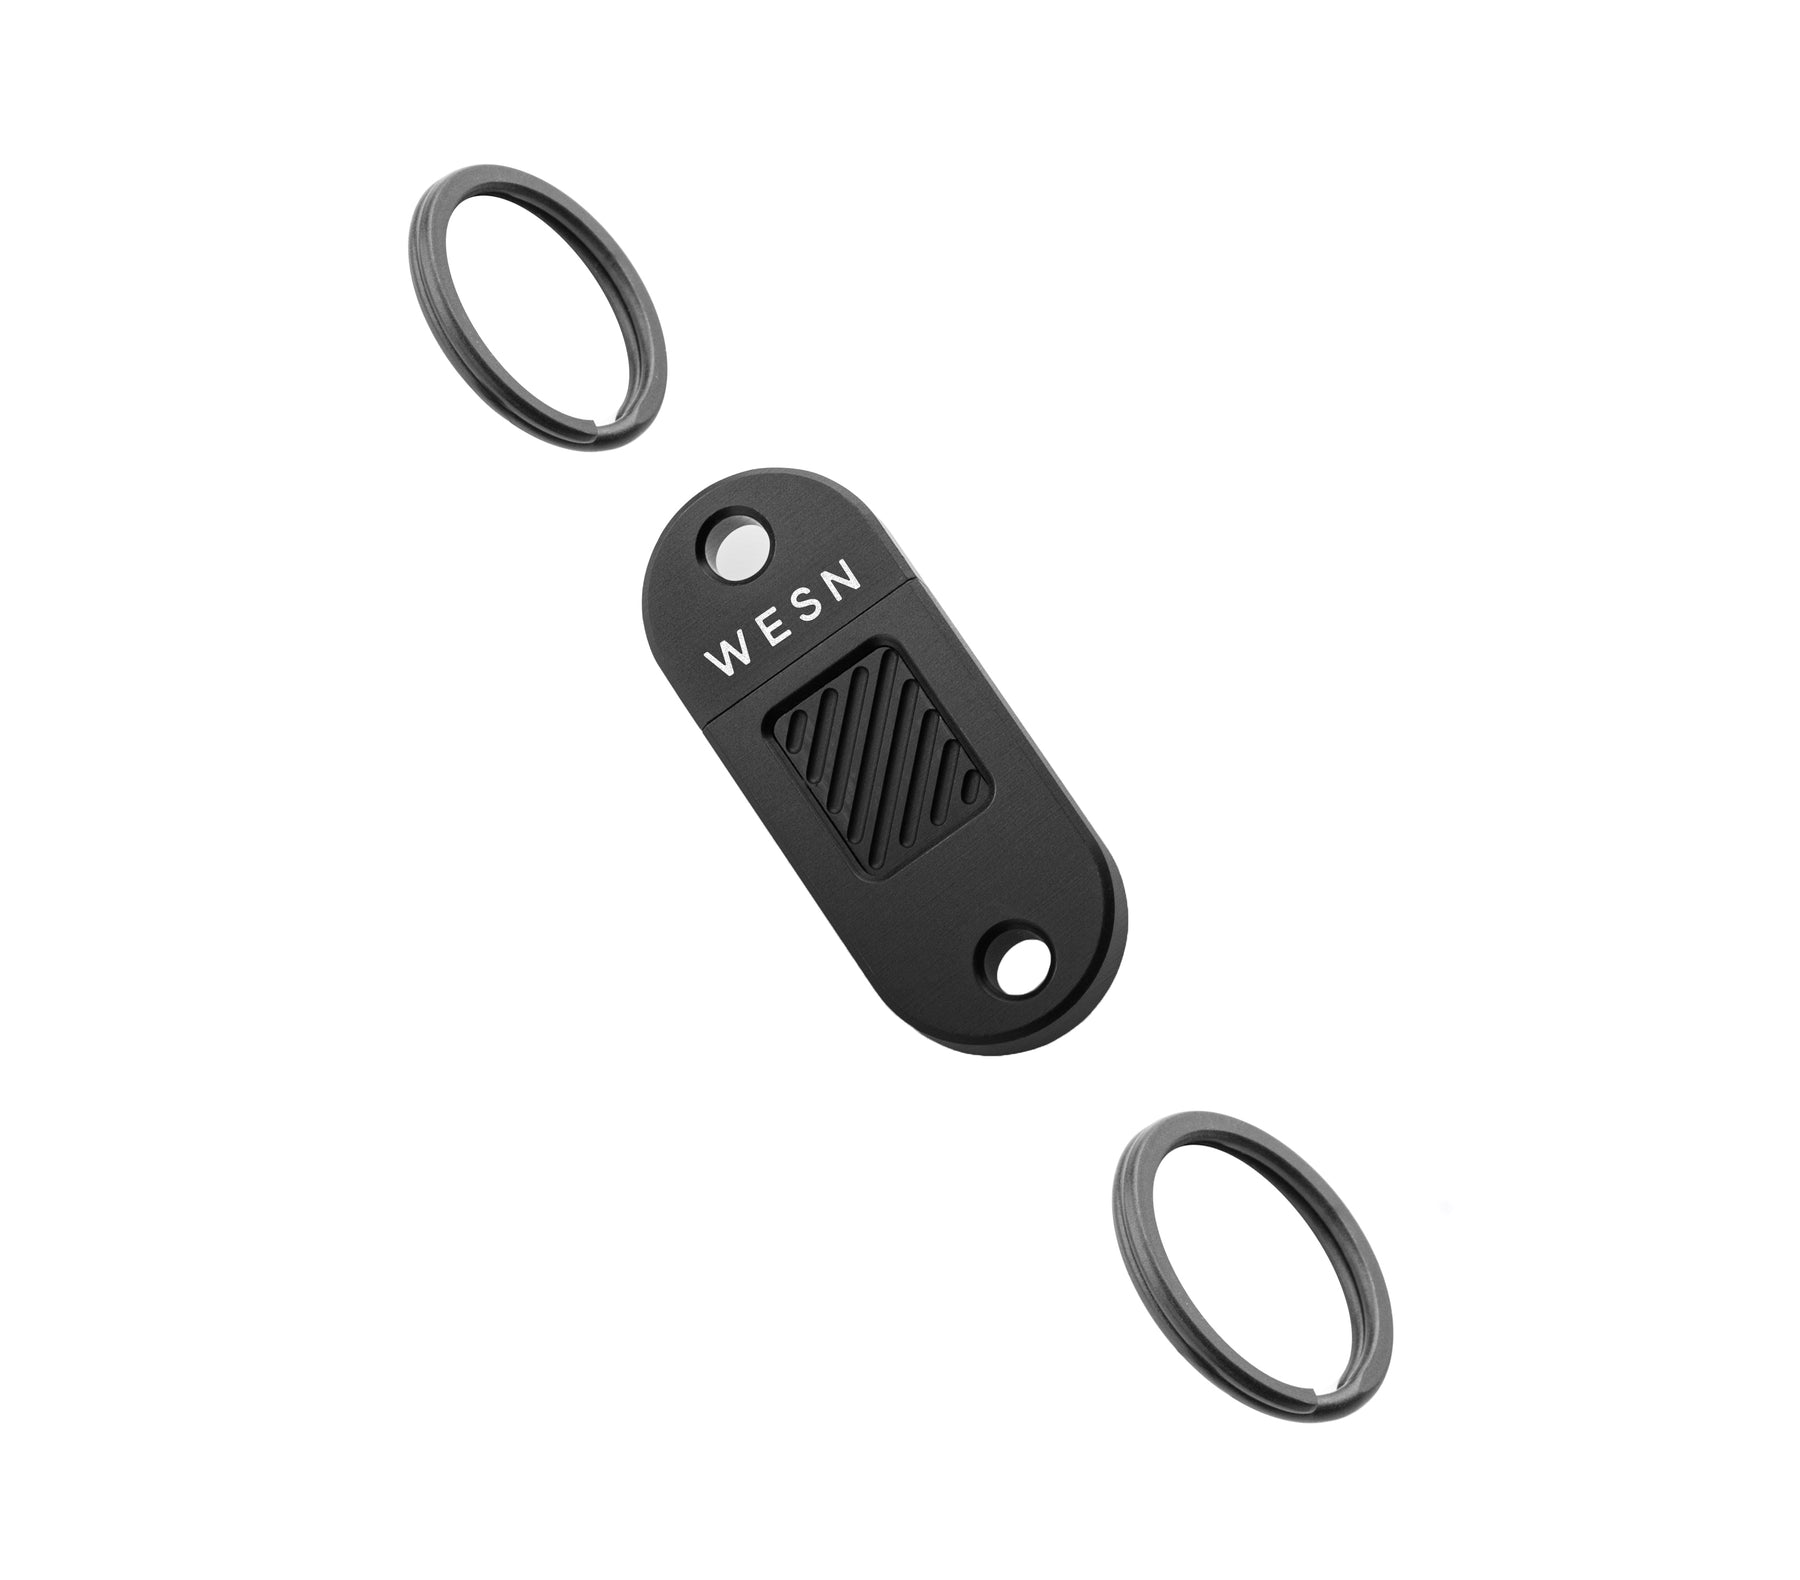 11-In-1 Ti Multifunction Quick-Release Keychain